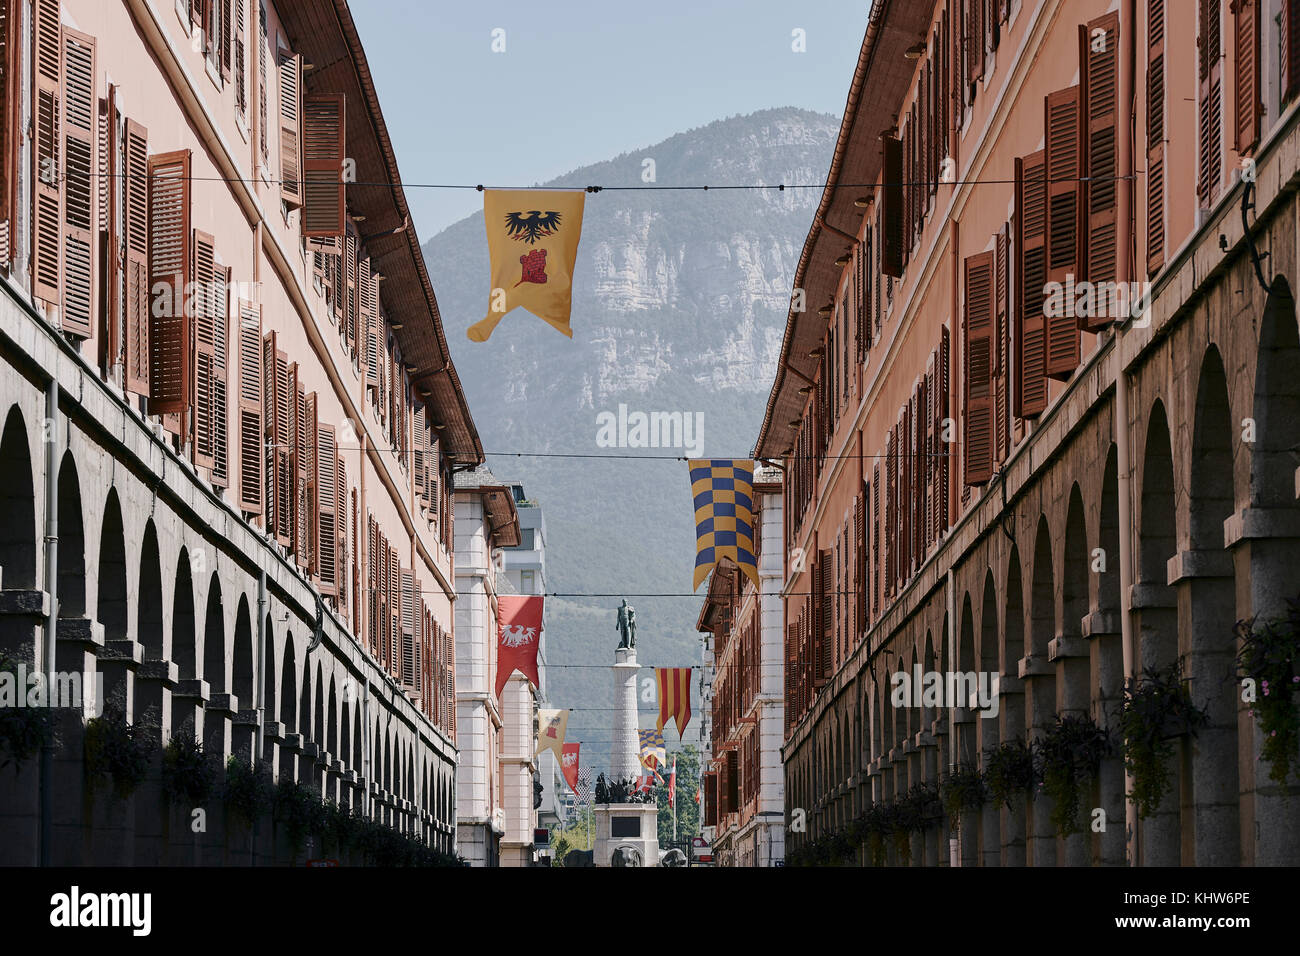 Traditional street with flags, Chambery, Rhone-Alpes, France Stock Photo